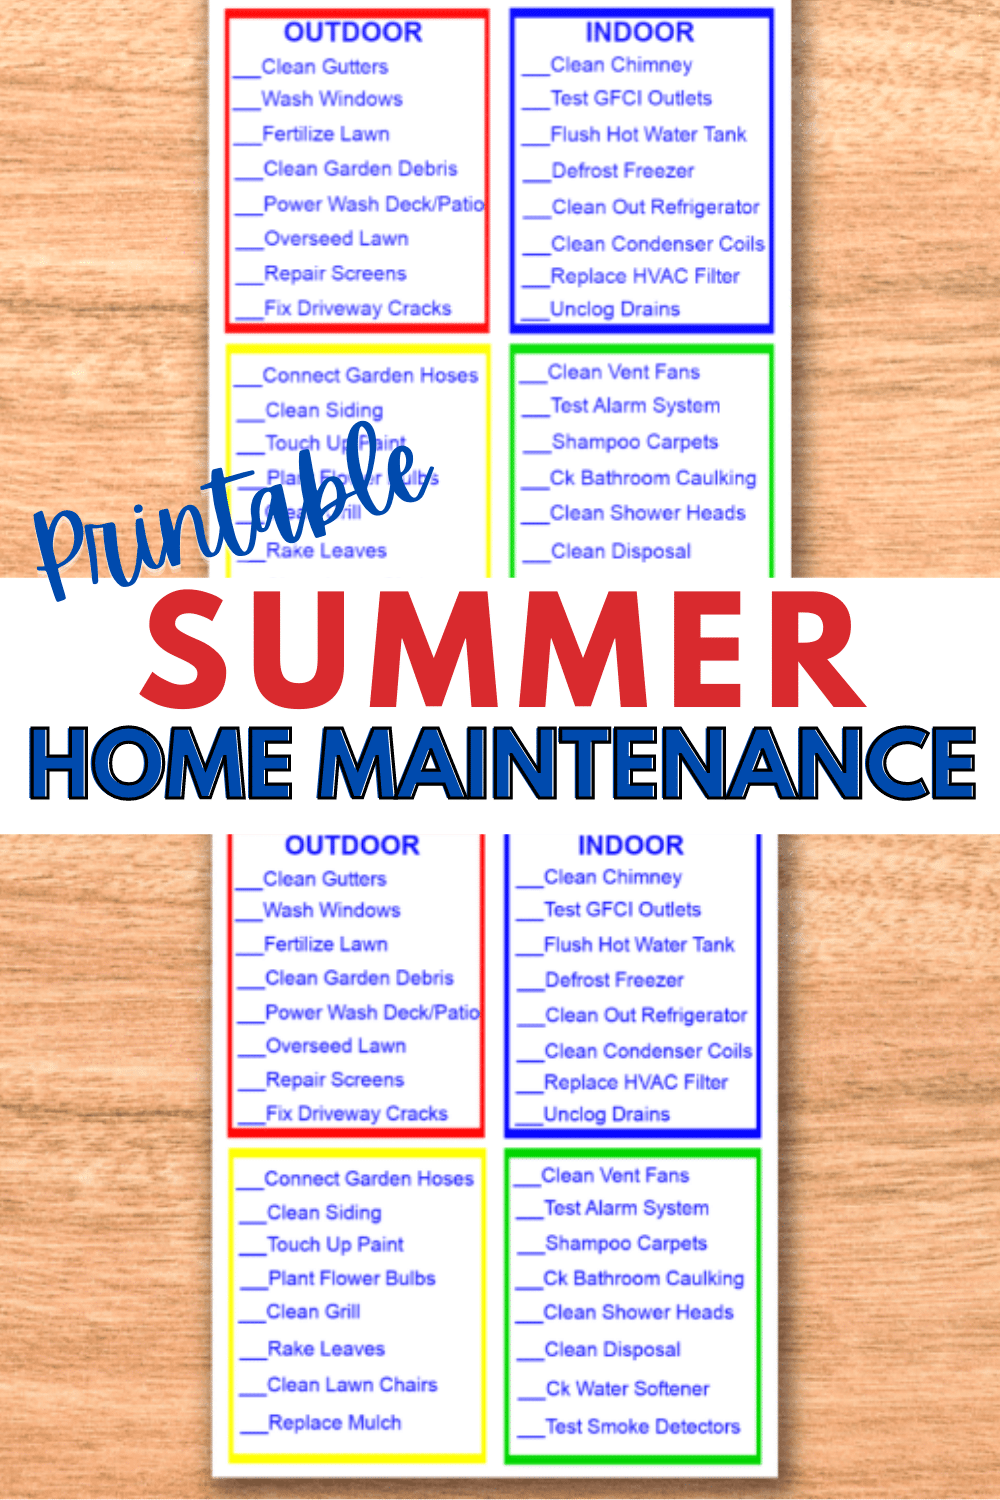 A Summer Home Maintenance Checklist will help you get your home ready inside and out for warm weather. Print off this handy checklist today! #printables #home #checklist via @wondermomwannab